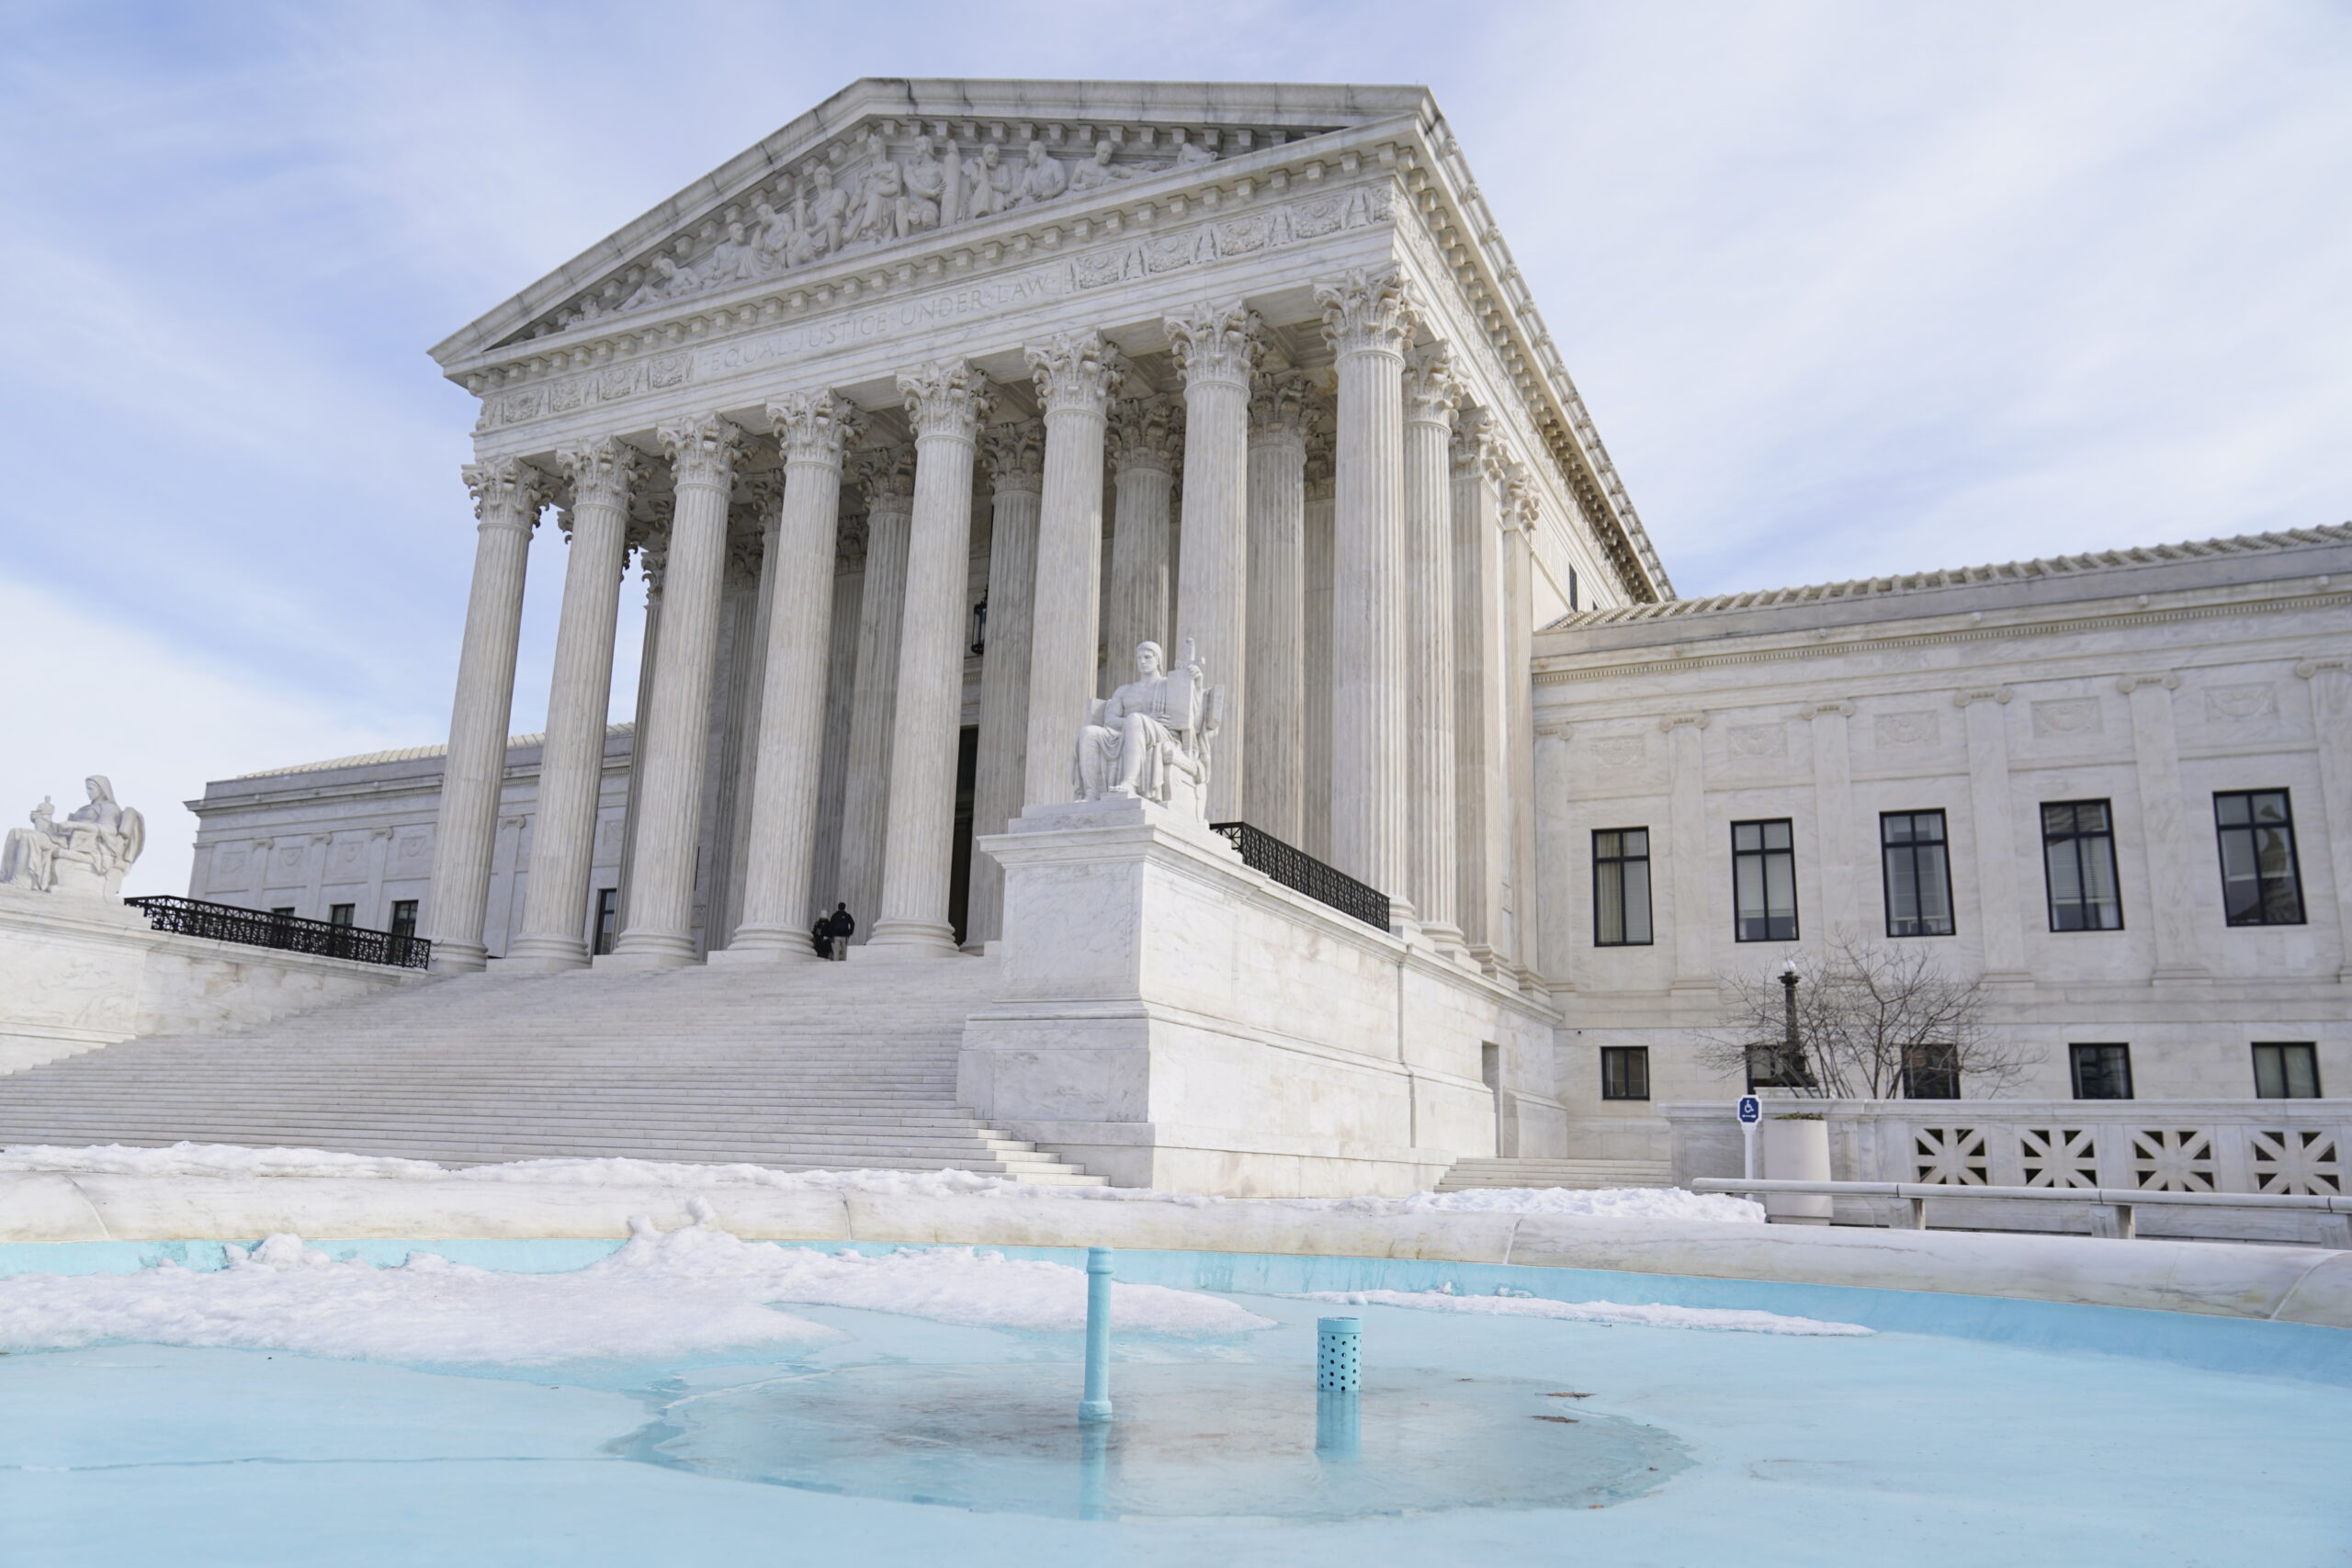 The U.S. Supreme Court on Wednesday, Jan.19, 2022, in Washington. In a rebuff to former President Donald Trump, the Supreme Court is allowing the release of presidential documents sought by the congressional committee investigating the Jan. 6 insurrection. (AP Photo/Mariam Zuhaib)